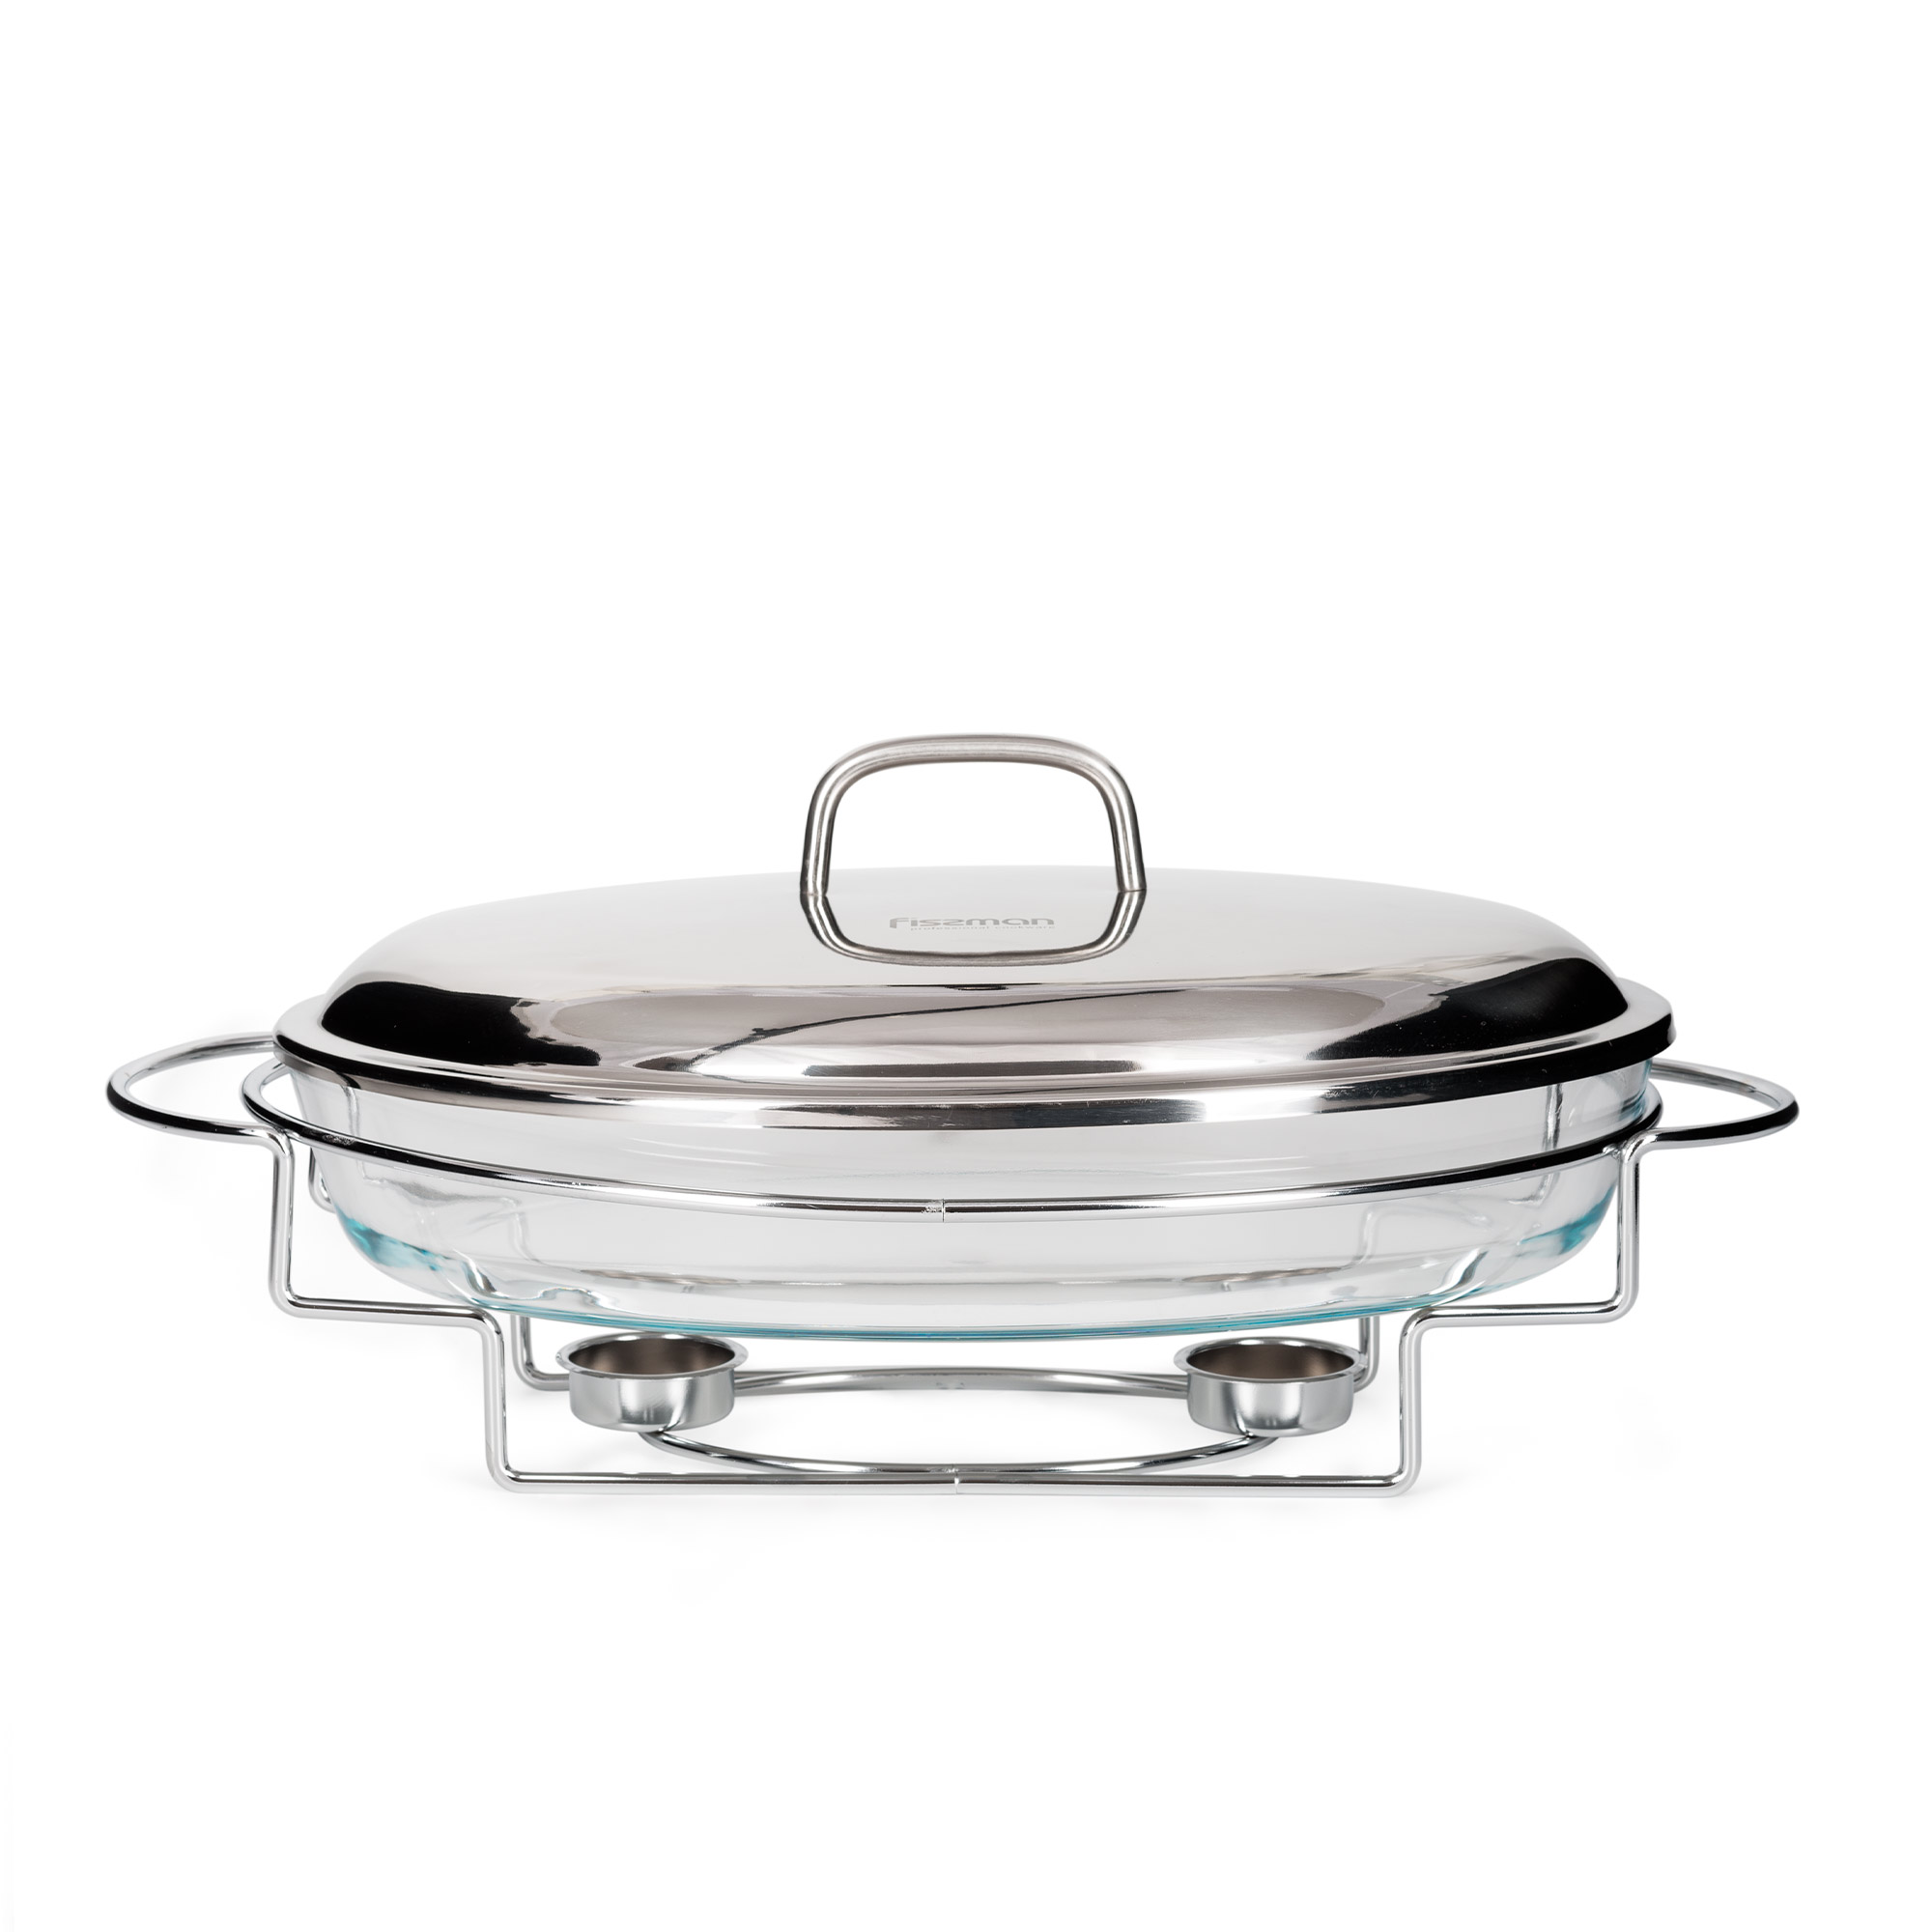 Oval chafing dish 42x25x19 cm / 3.0 LTR (heat resistant glass)